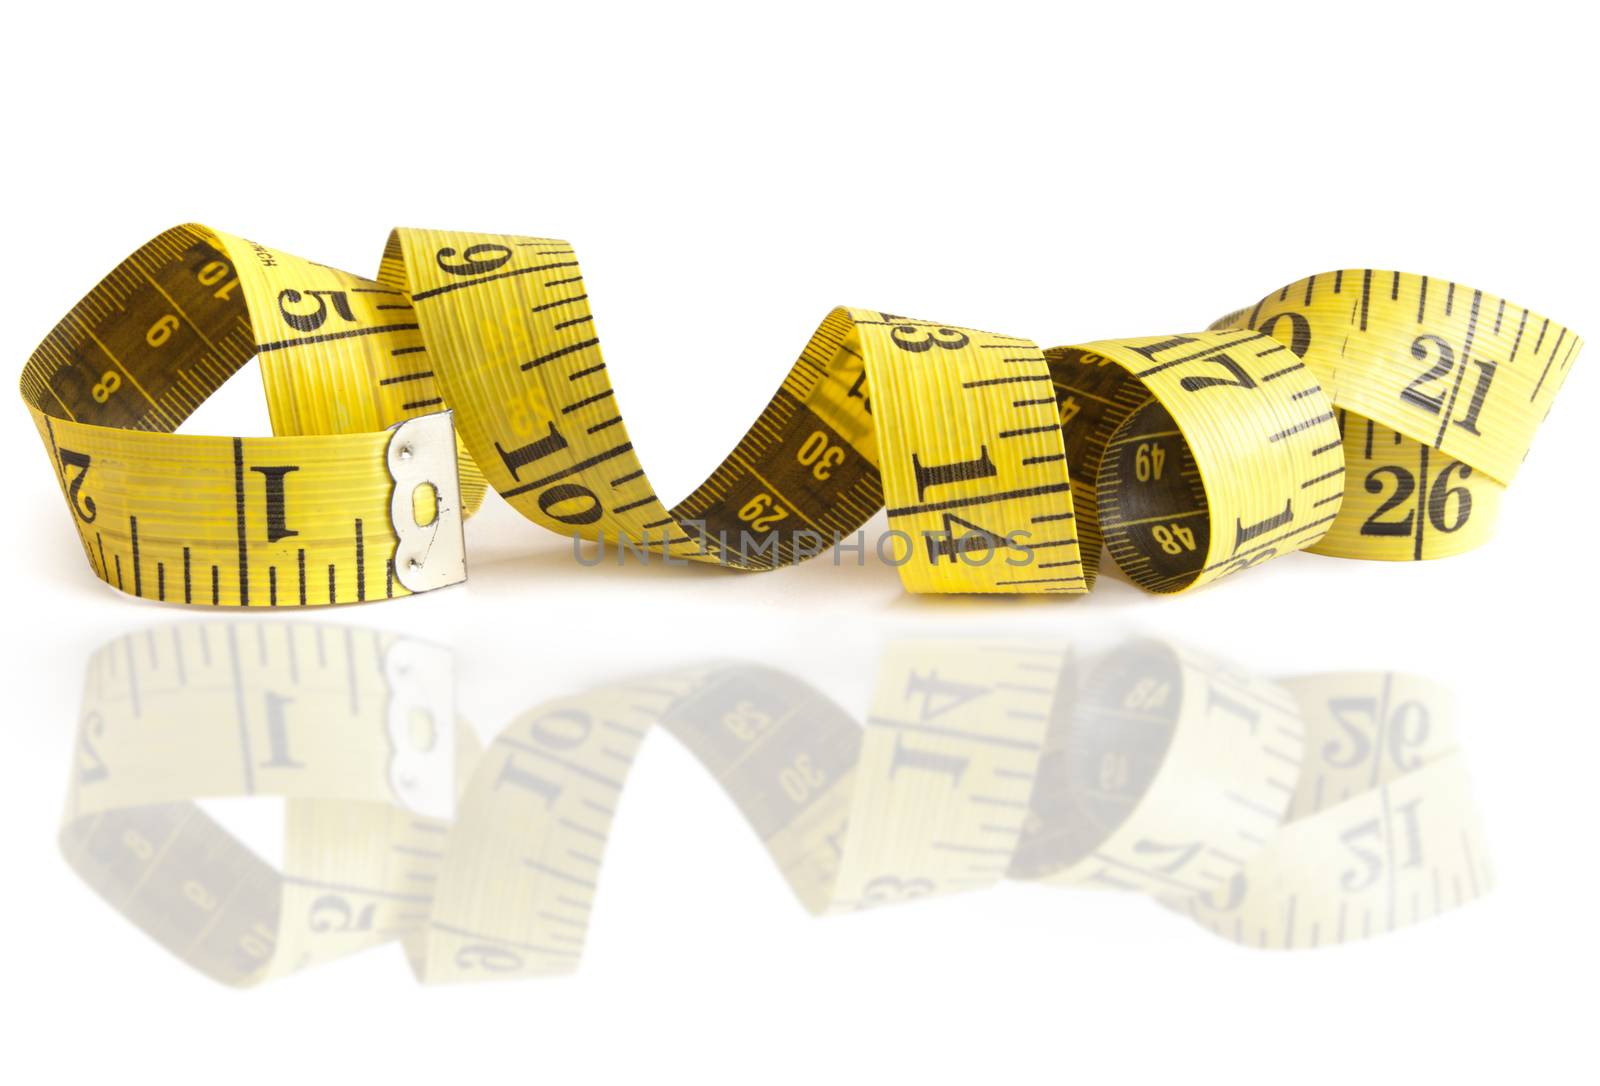 Measuring tape over a white background